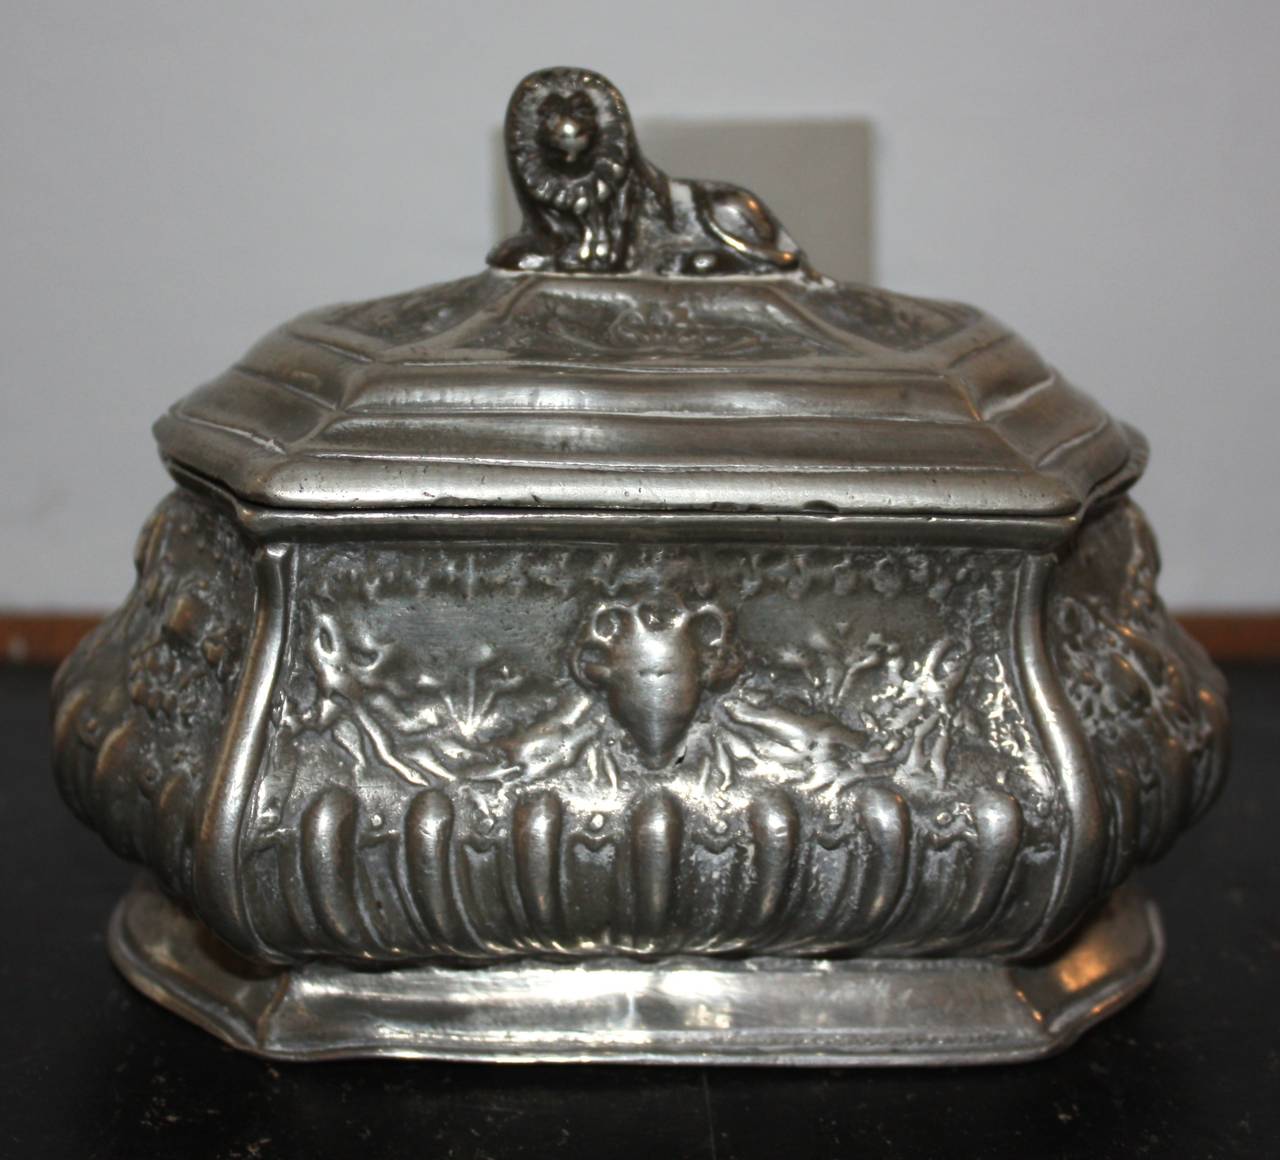 Very beautiful Rococo pewter tea caddy with lion on the lid.